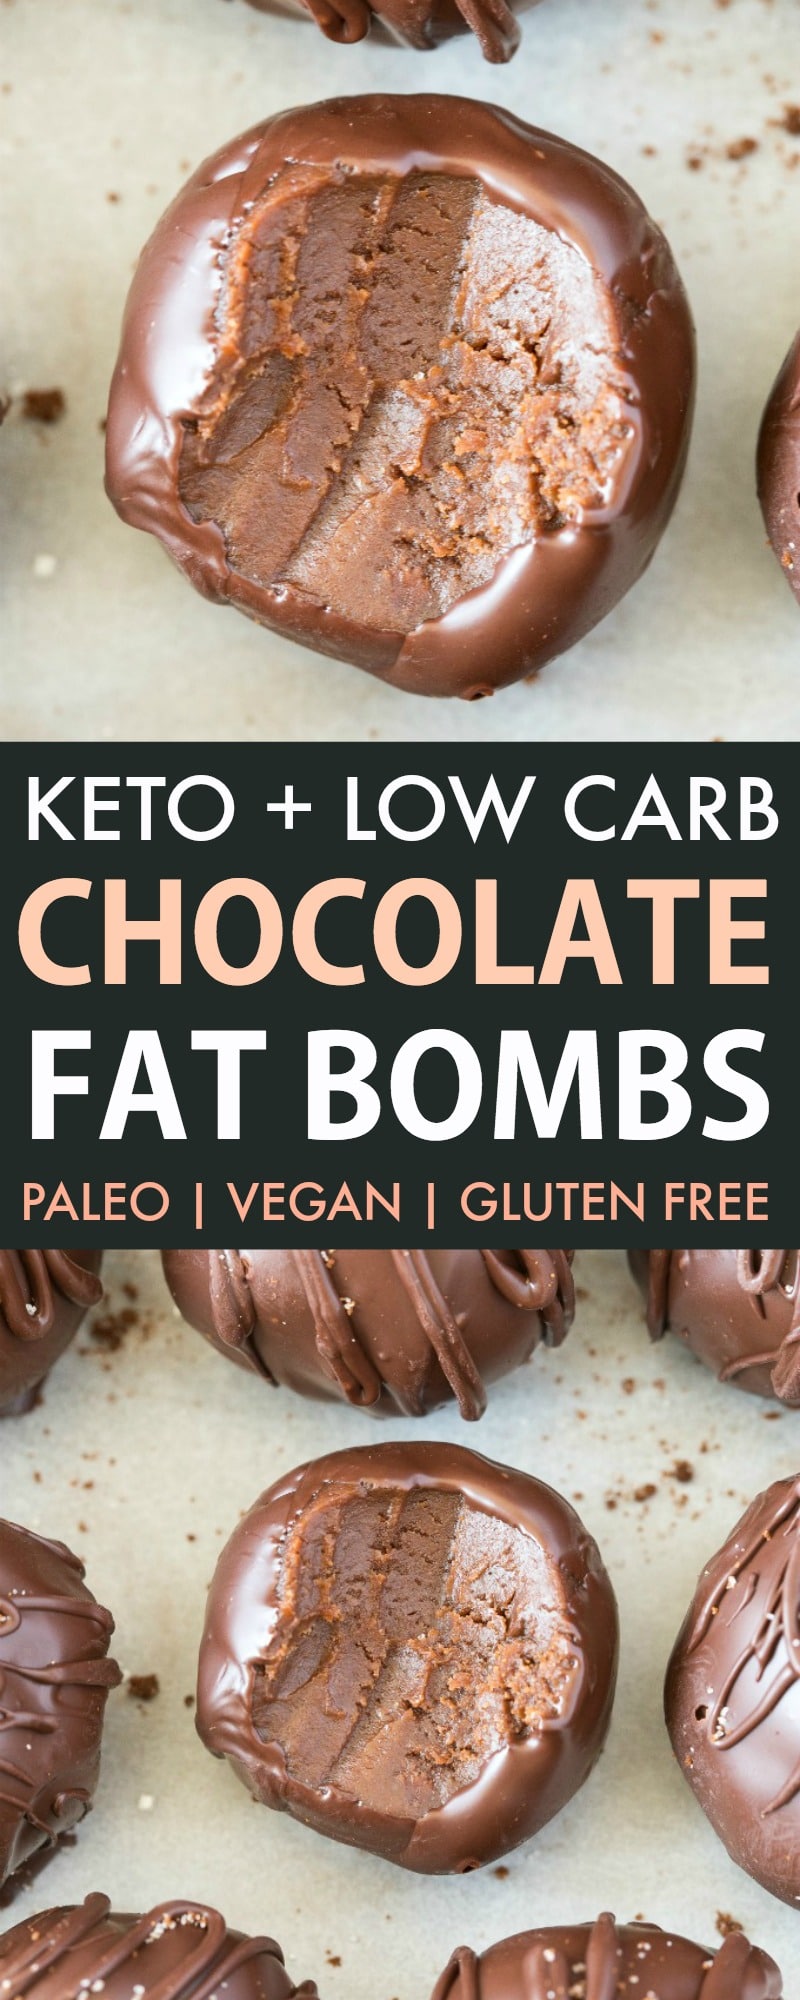 Chocolate Fat Bombs are keto, low carb and dairy free, and perfect no bake keto dessert.